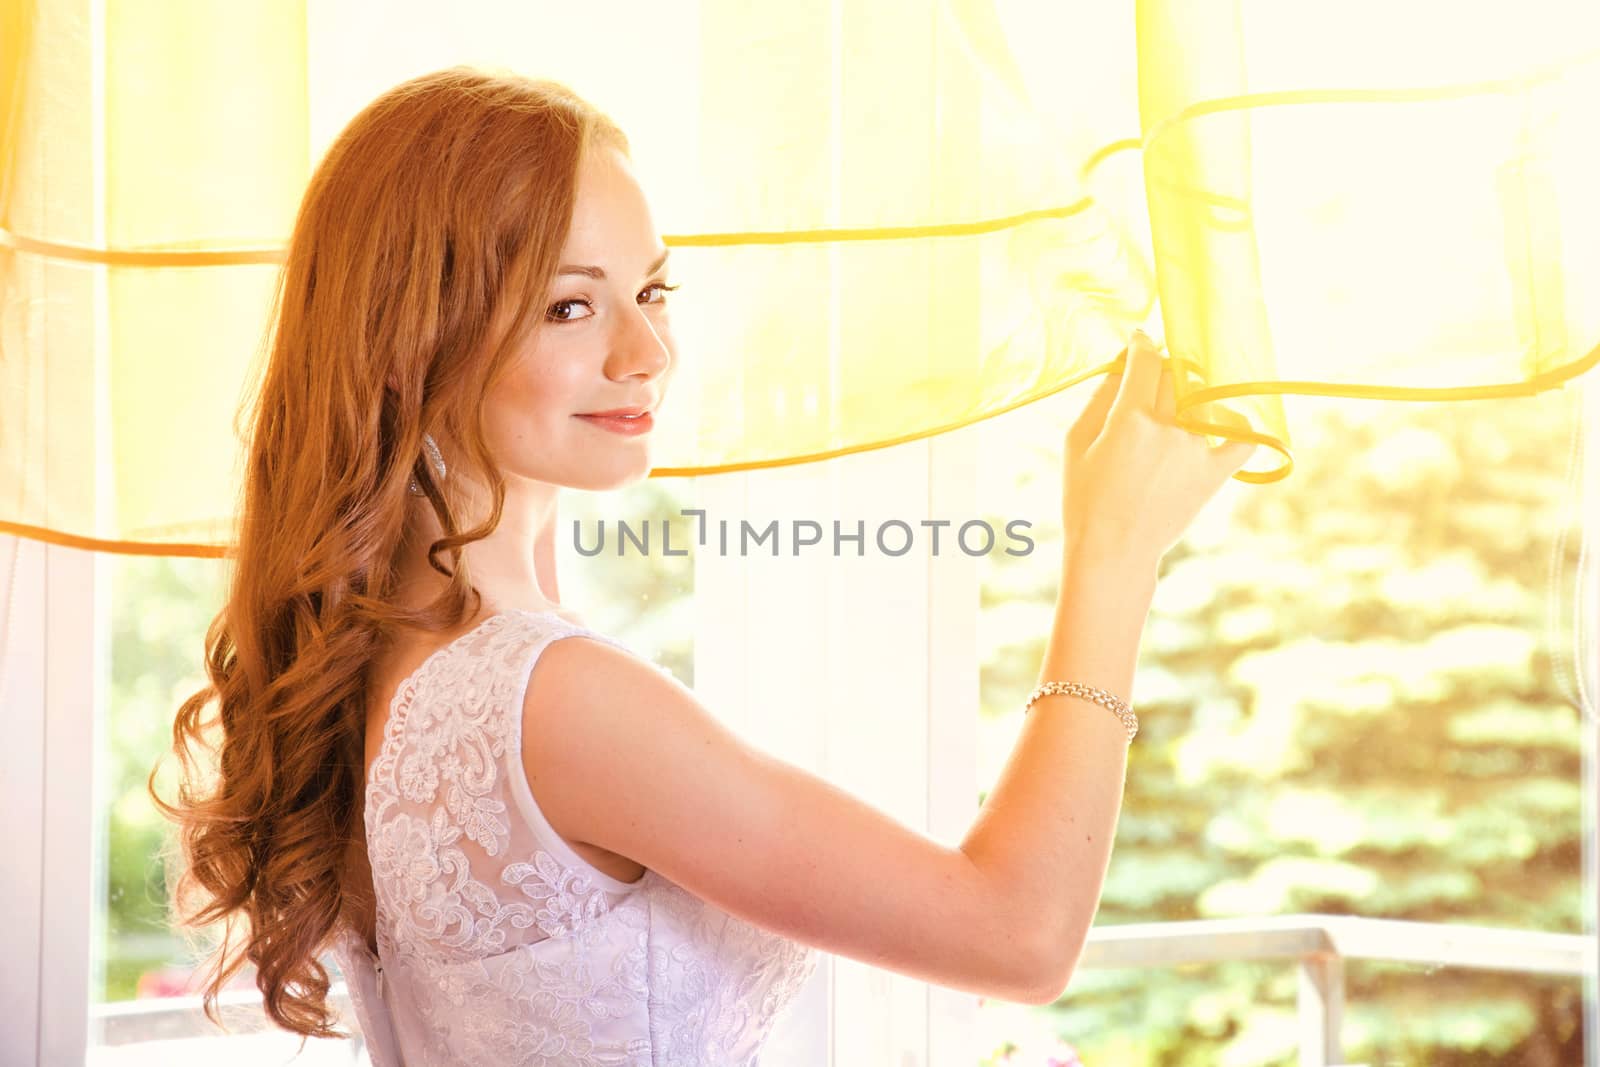 Young beautiful bride in wedding dress looking through the window. Marriage and wedding concept image.